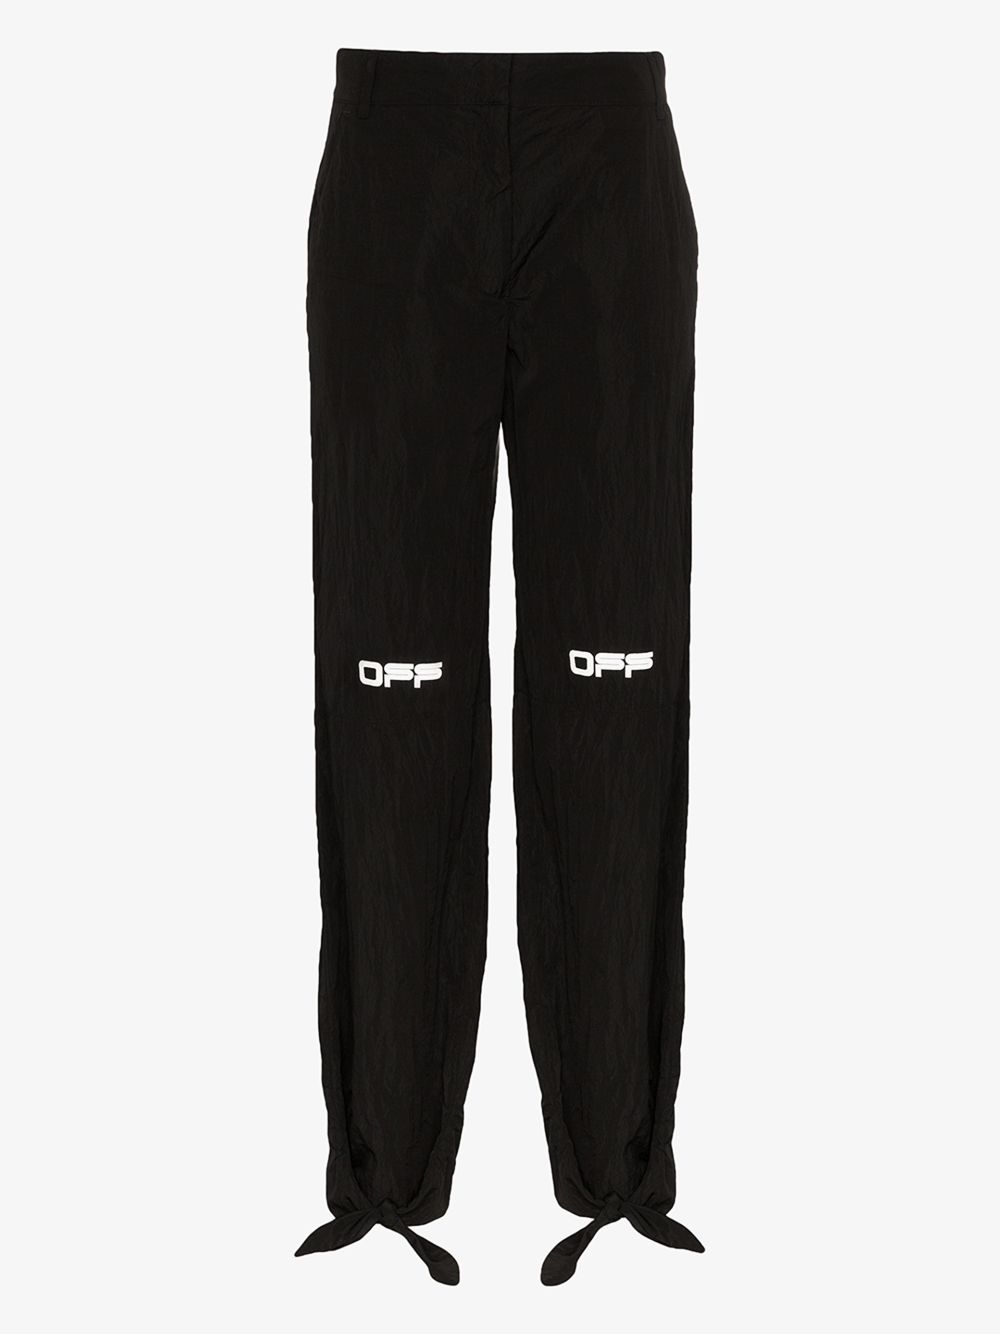 OFF-WHITE OFF-WHITE ANKLE TIE TRACK PANTS,OWCA097R20H14087100114811552